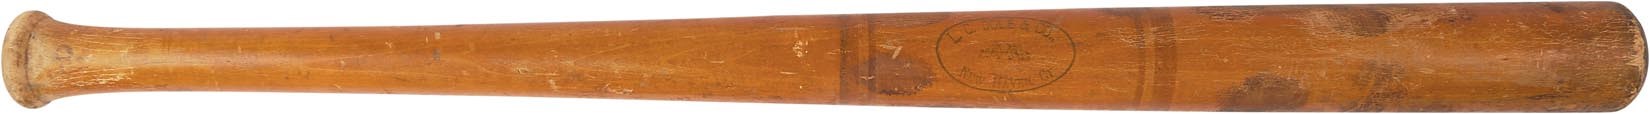 - 1880s L.C. Dole Bat Used by Samuel M. Chase